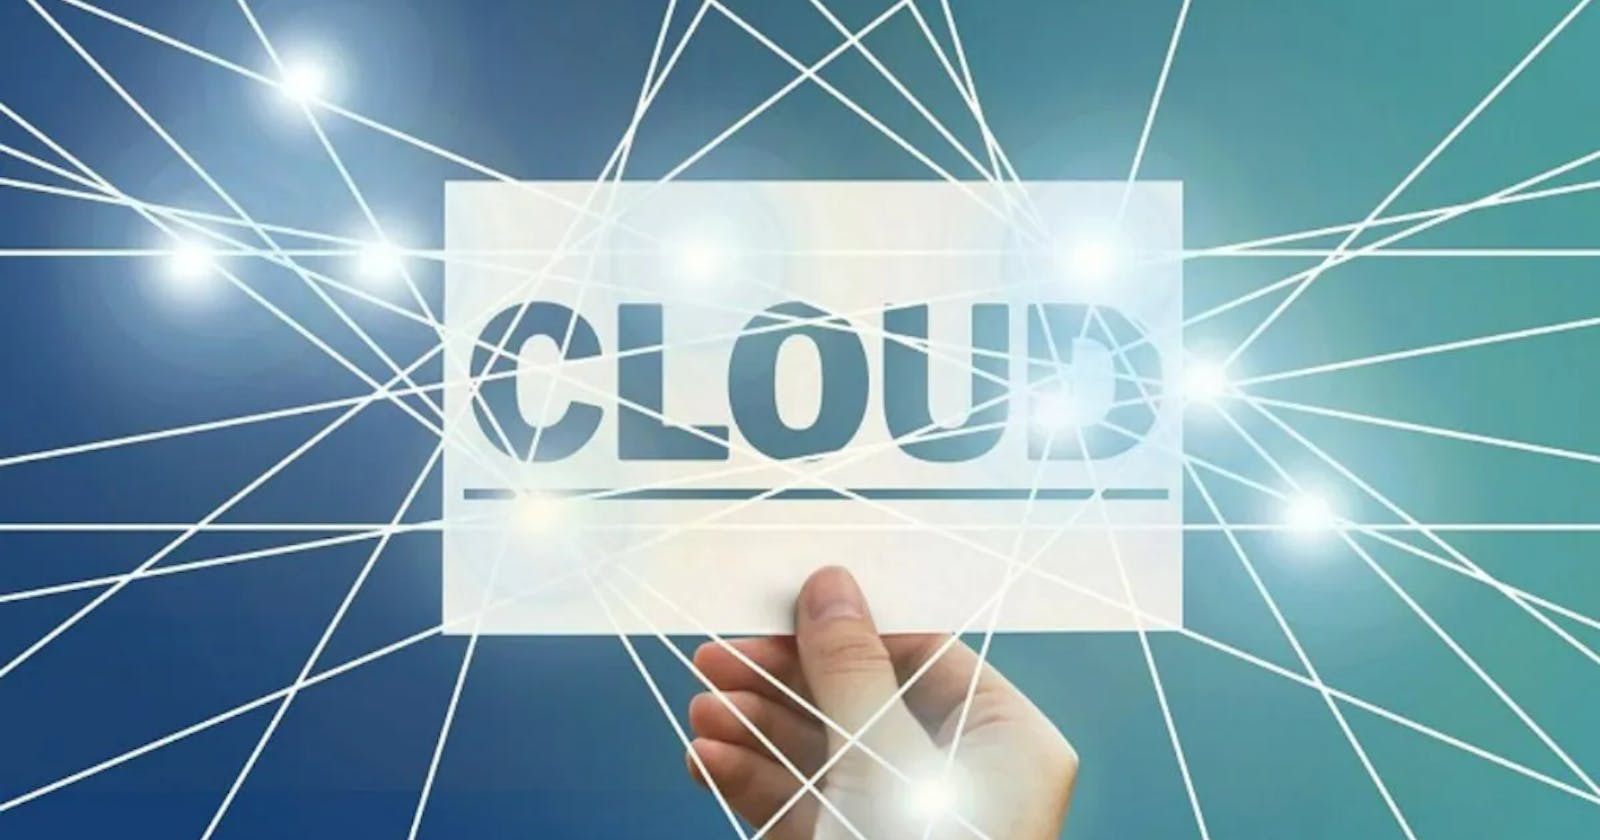 Strategies That Can Help Telecom Meet Challenges And Move To The Cloud